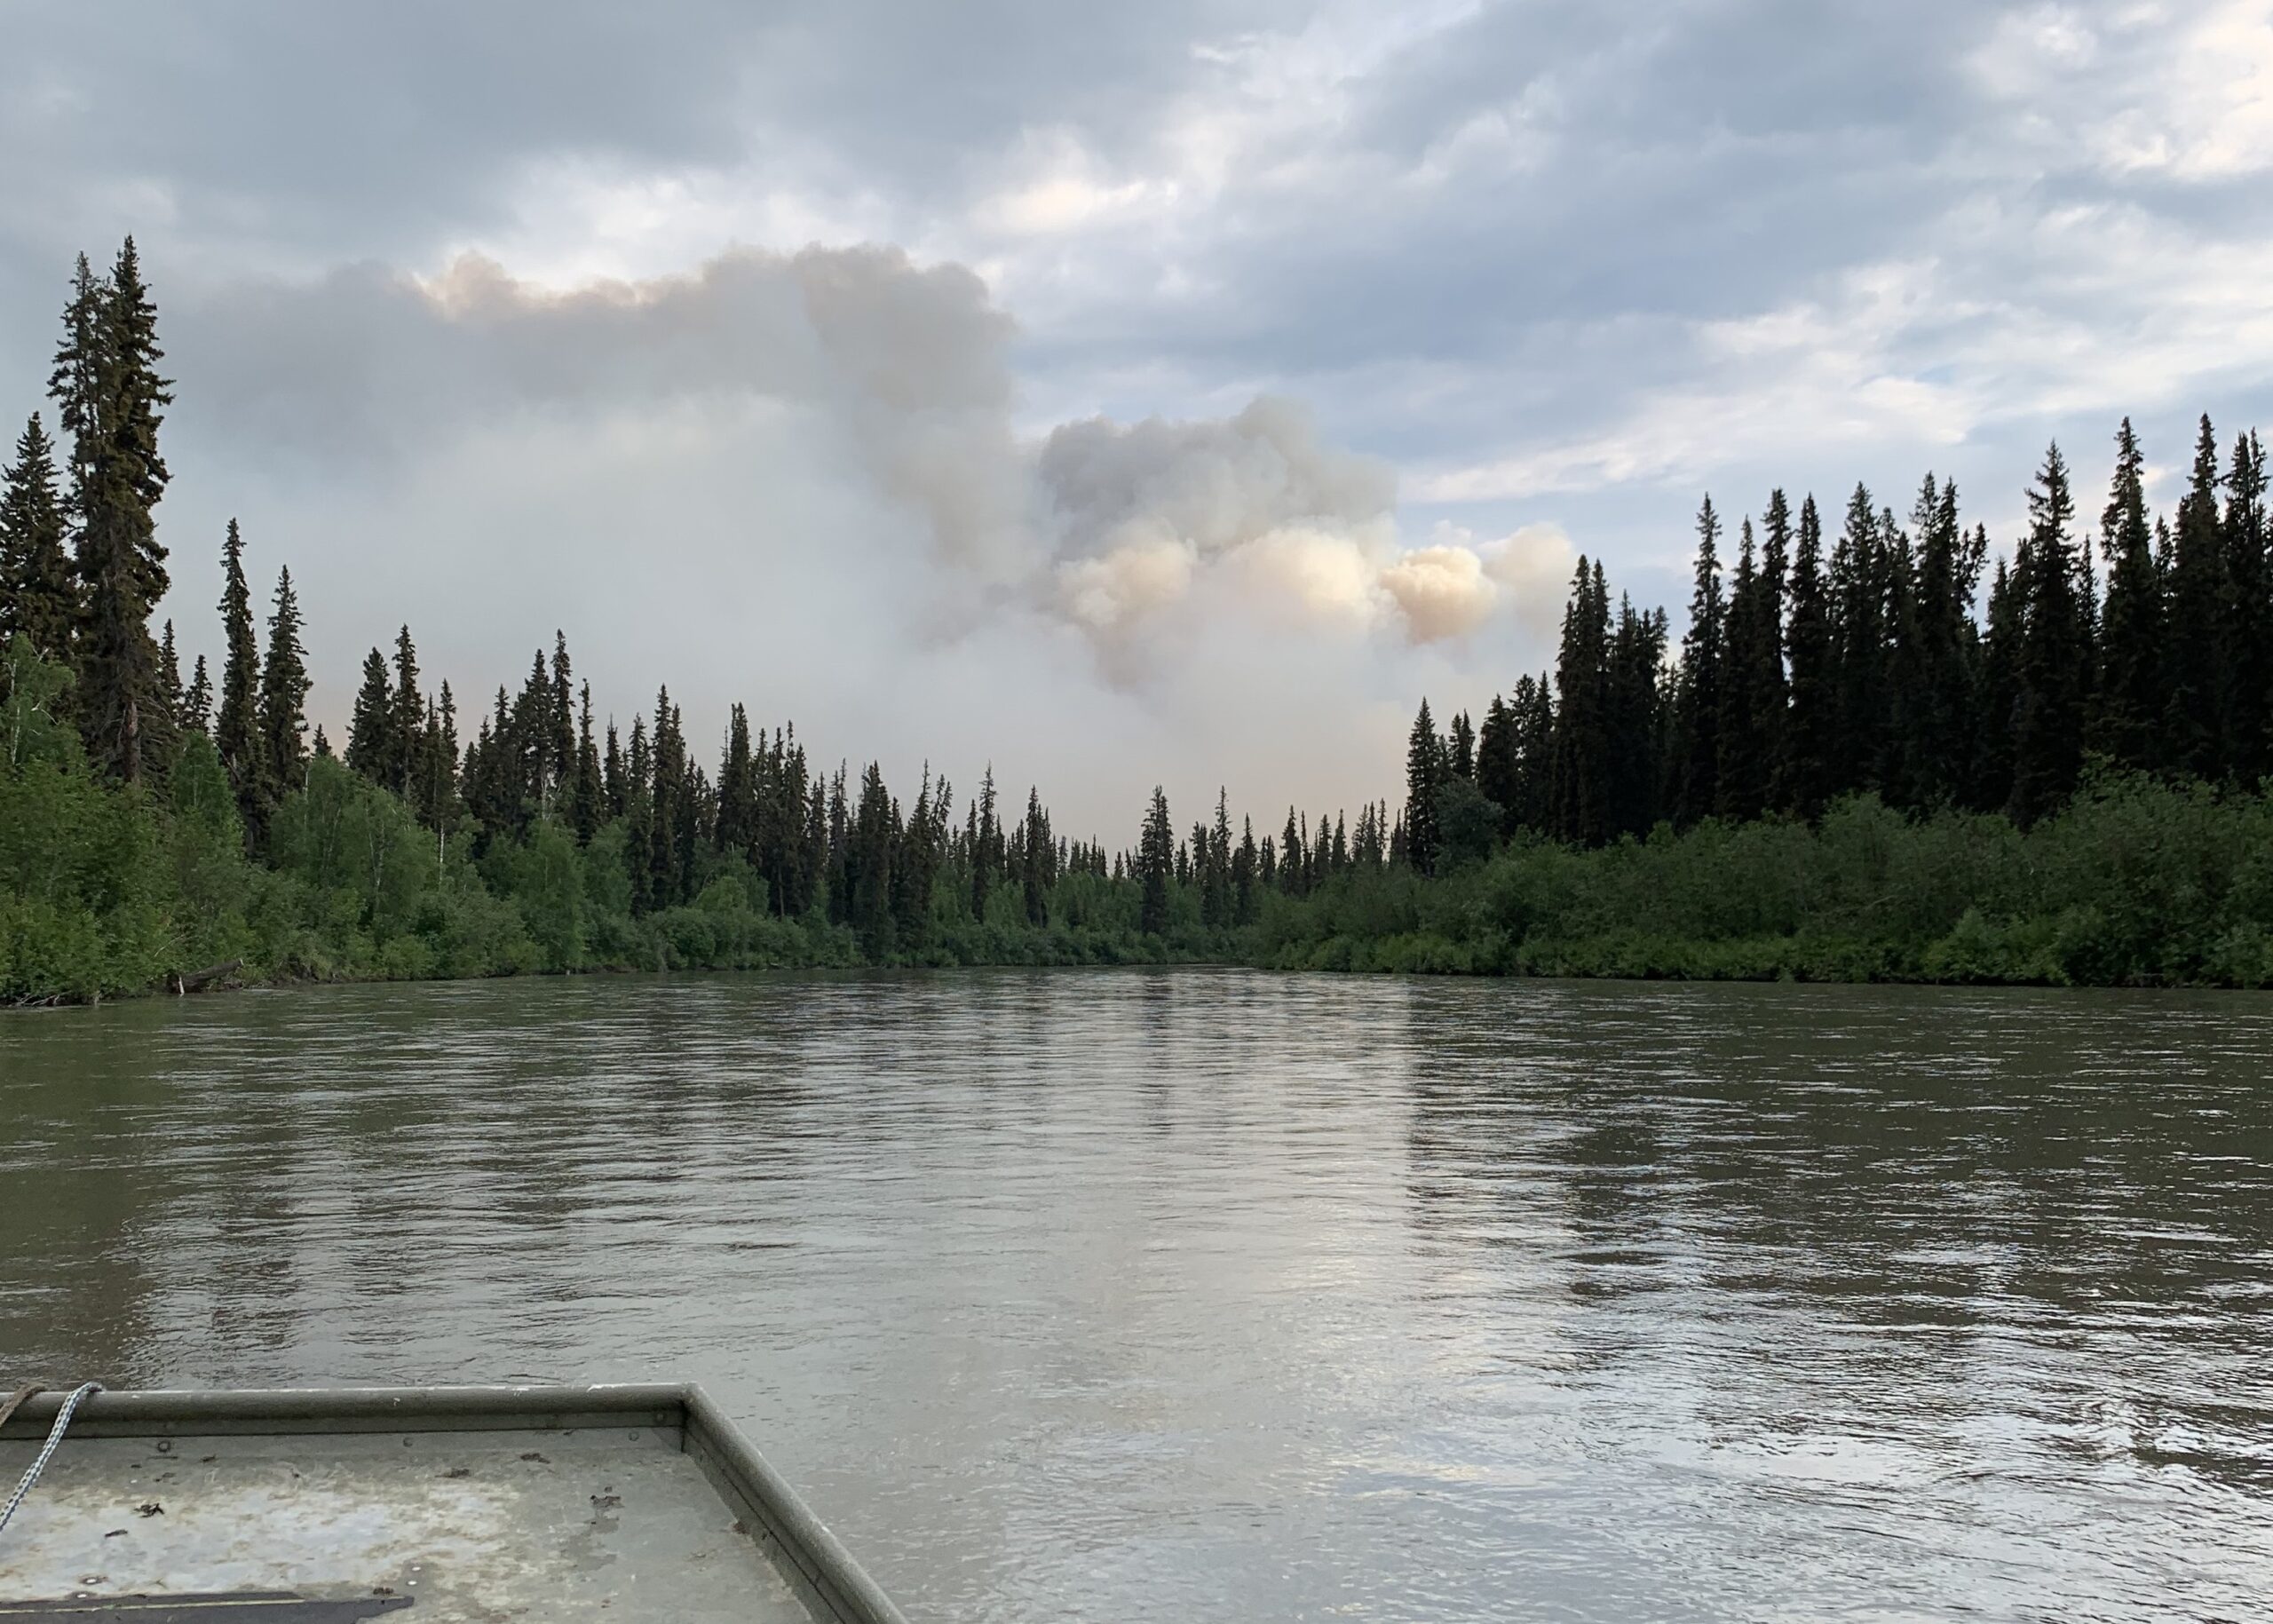 A newly-started wildfire in interior Alaska